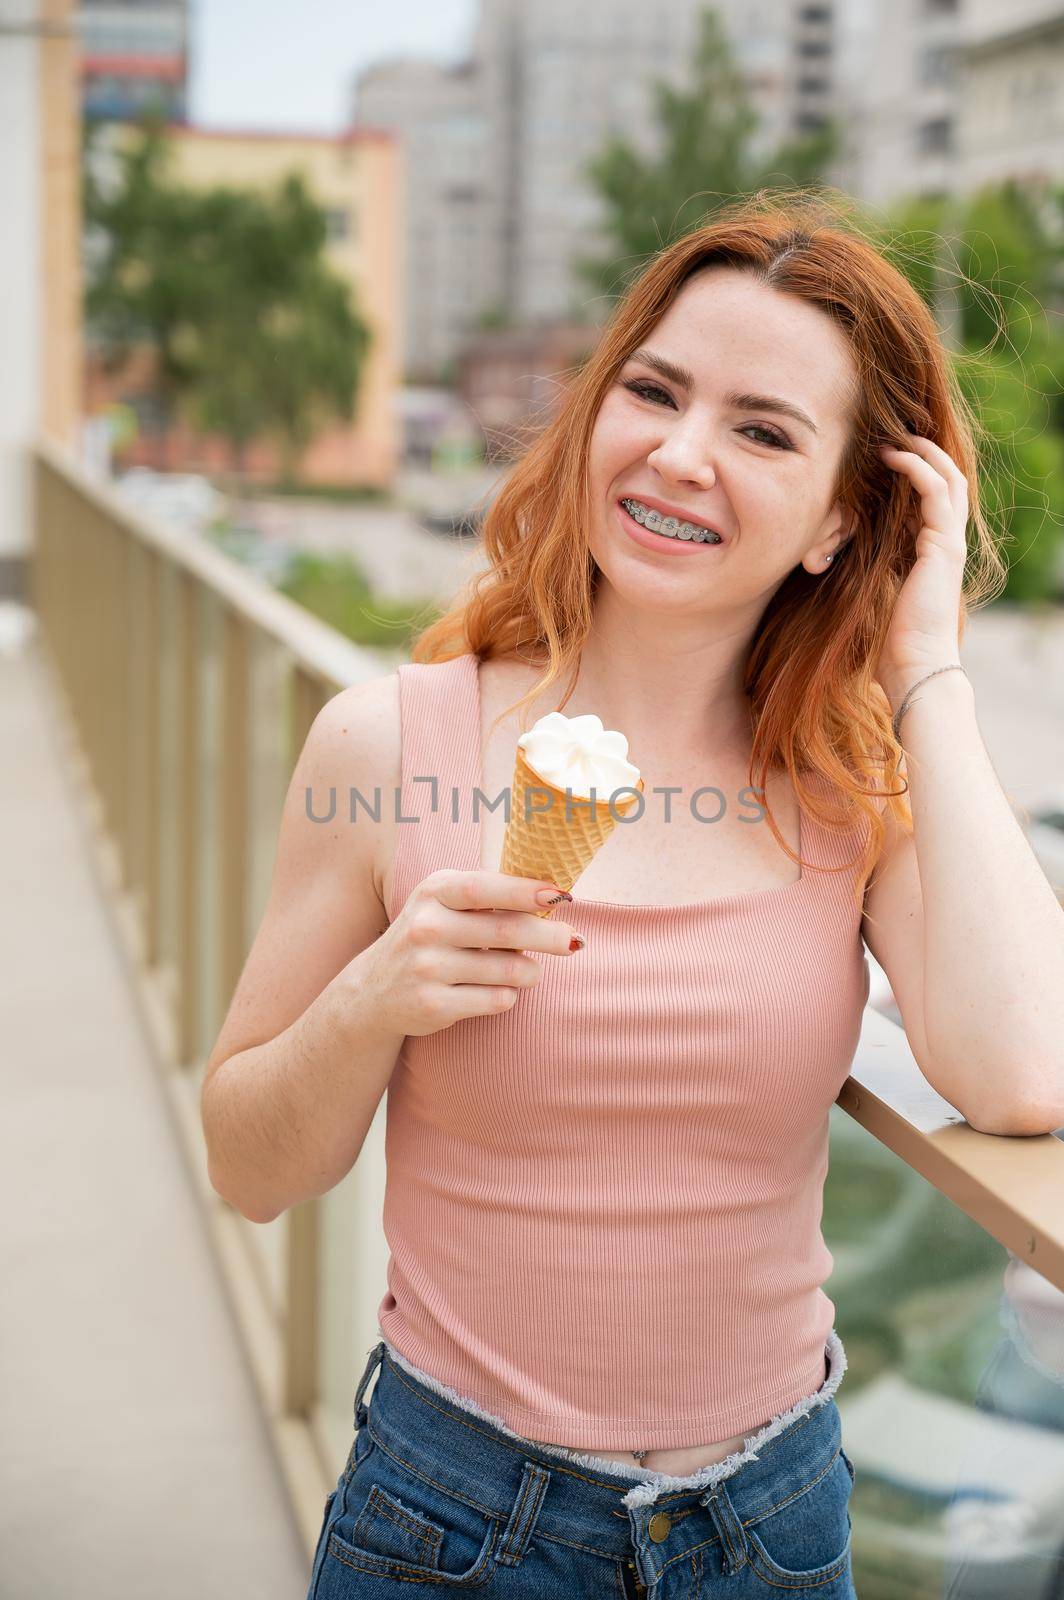 Portrait of young beautiful red-haired woman smiling with braces and going to eat ice cream cone outdoors in summer by mrwed54